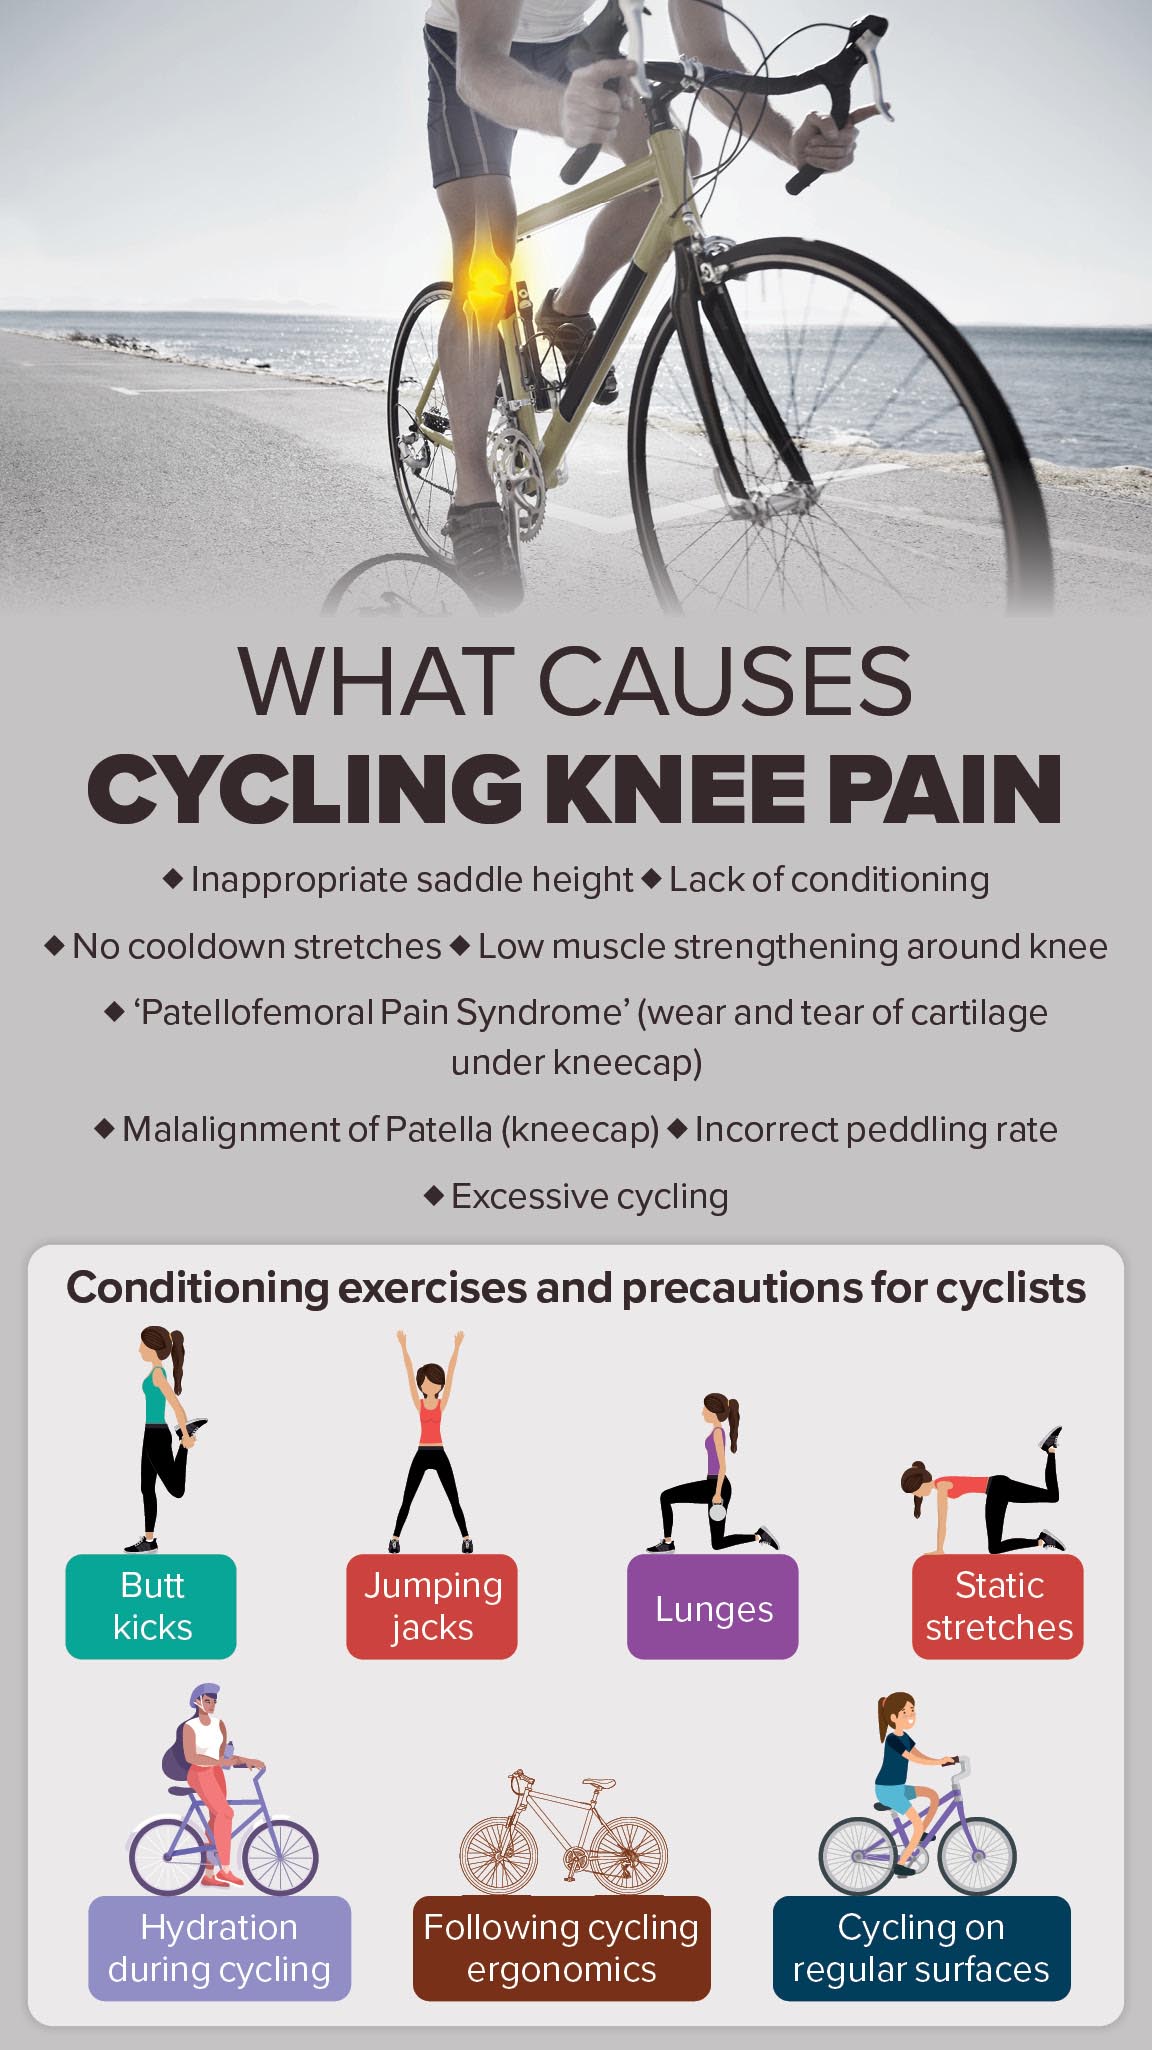 Many cyclists suffer from knee pain, which is often overlooked as it tends to be mild, and manageable.